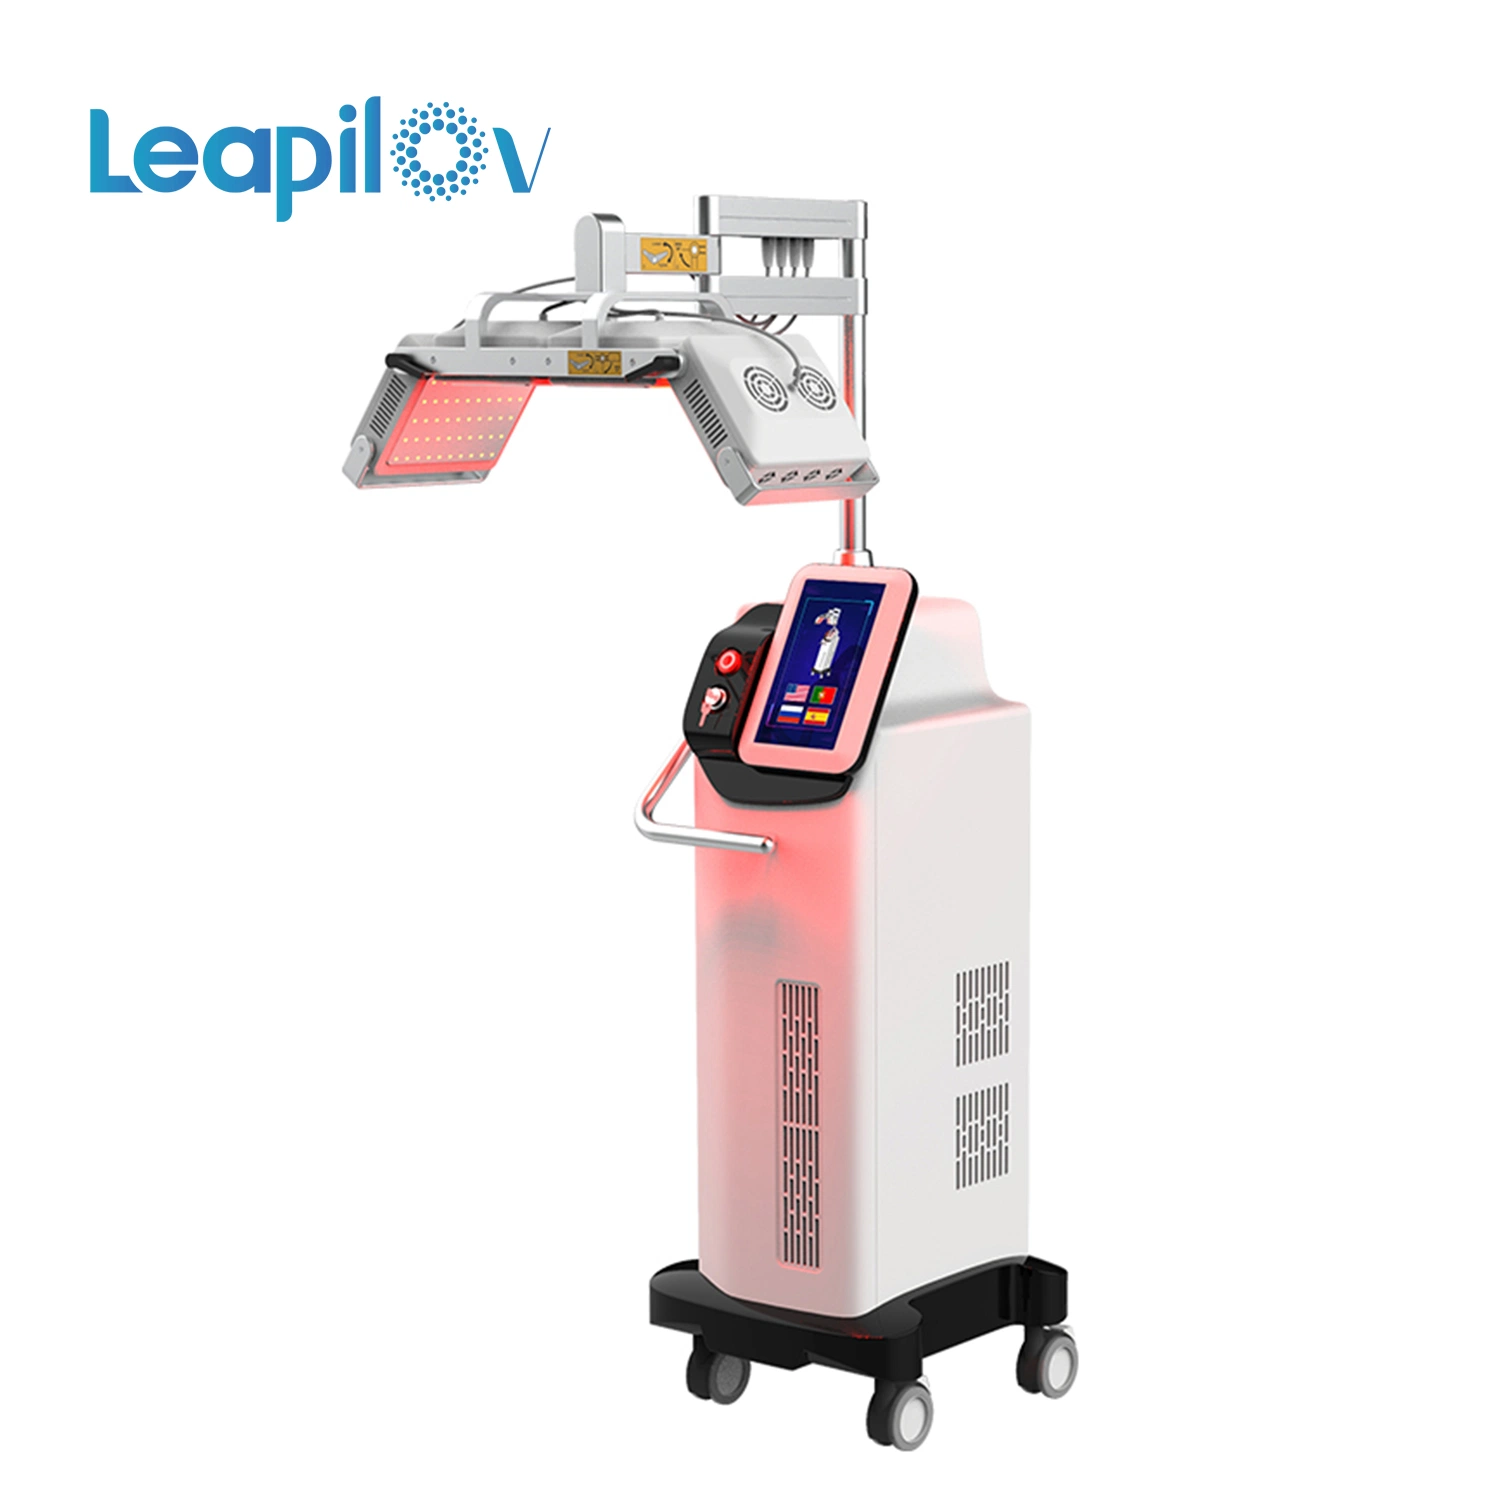 The Newest PDT LED Facial Light/Photo Therapy Skin Care/LED PDT Therapy Skin Rejuvenation PDT Machine Beauty Salon Equipment